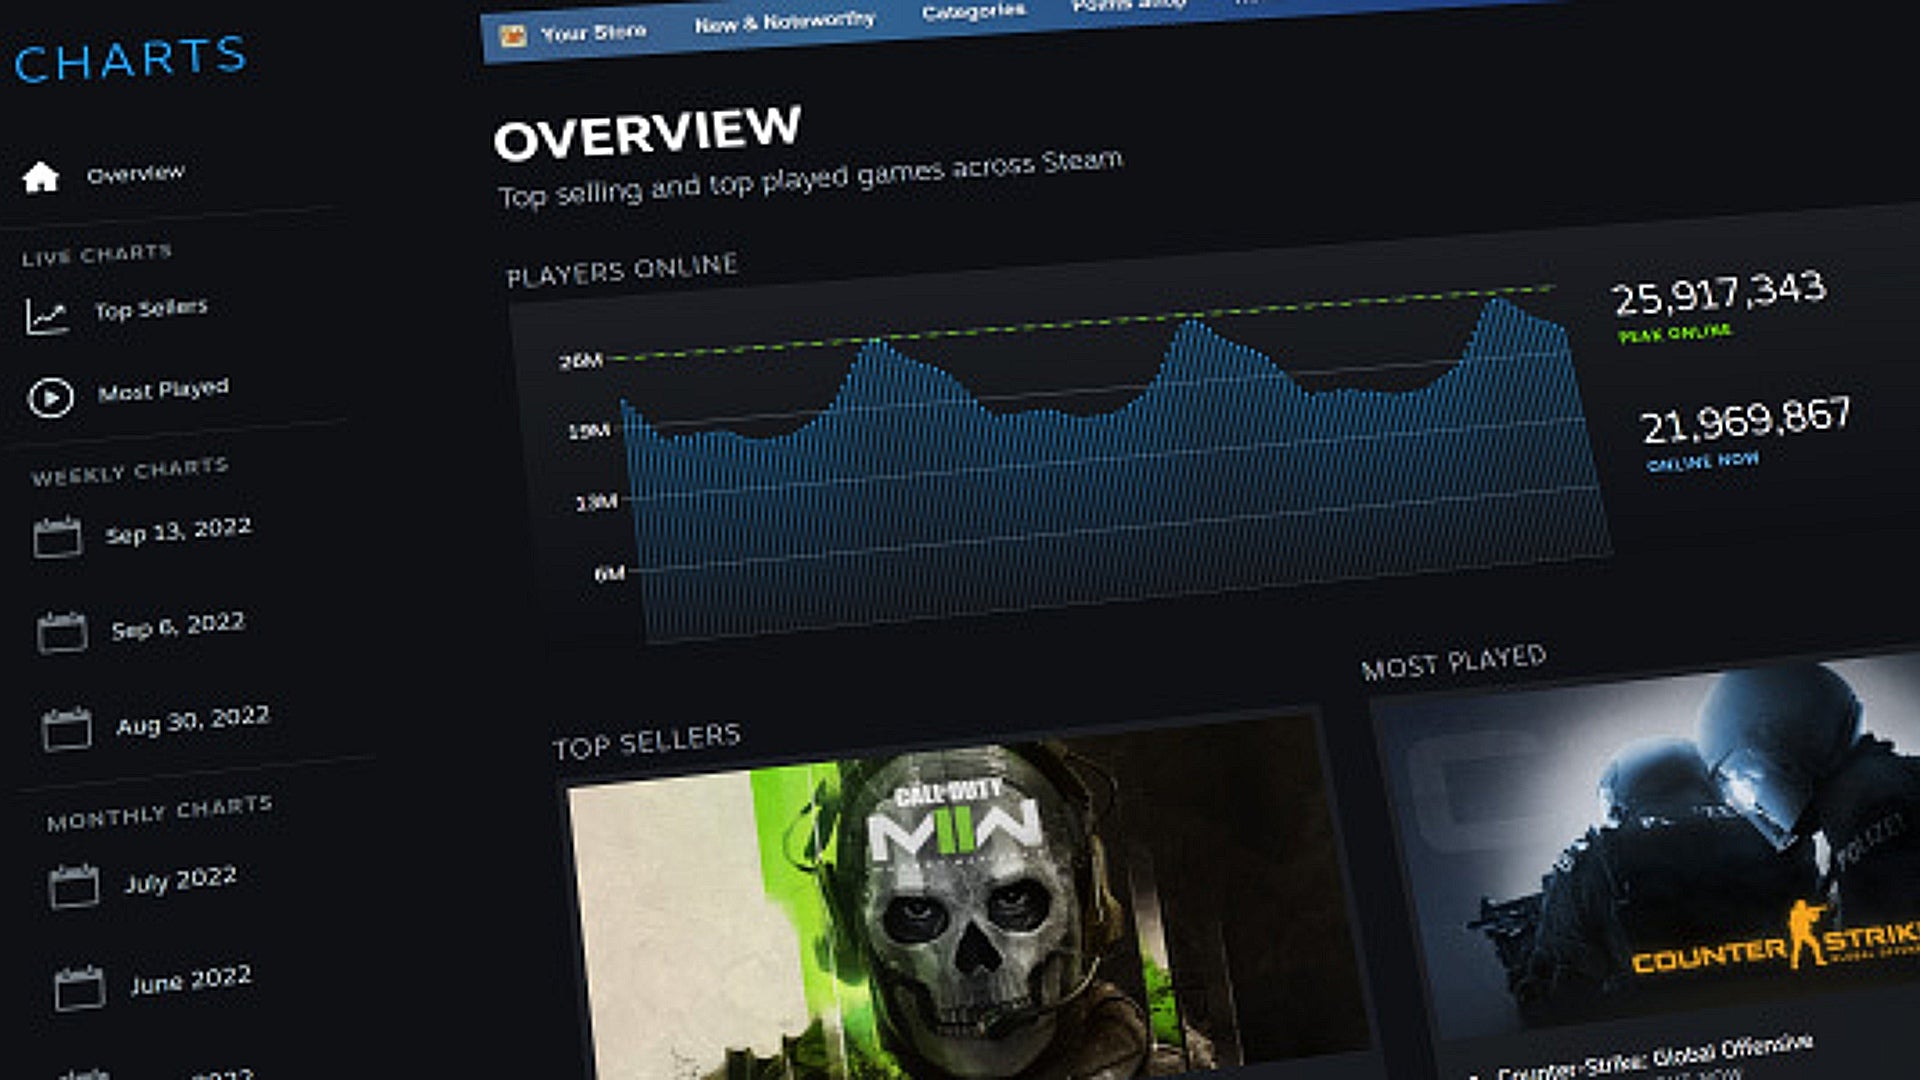 Valve revamps Steam charts with real-time top sellers and most played hubs